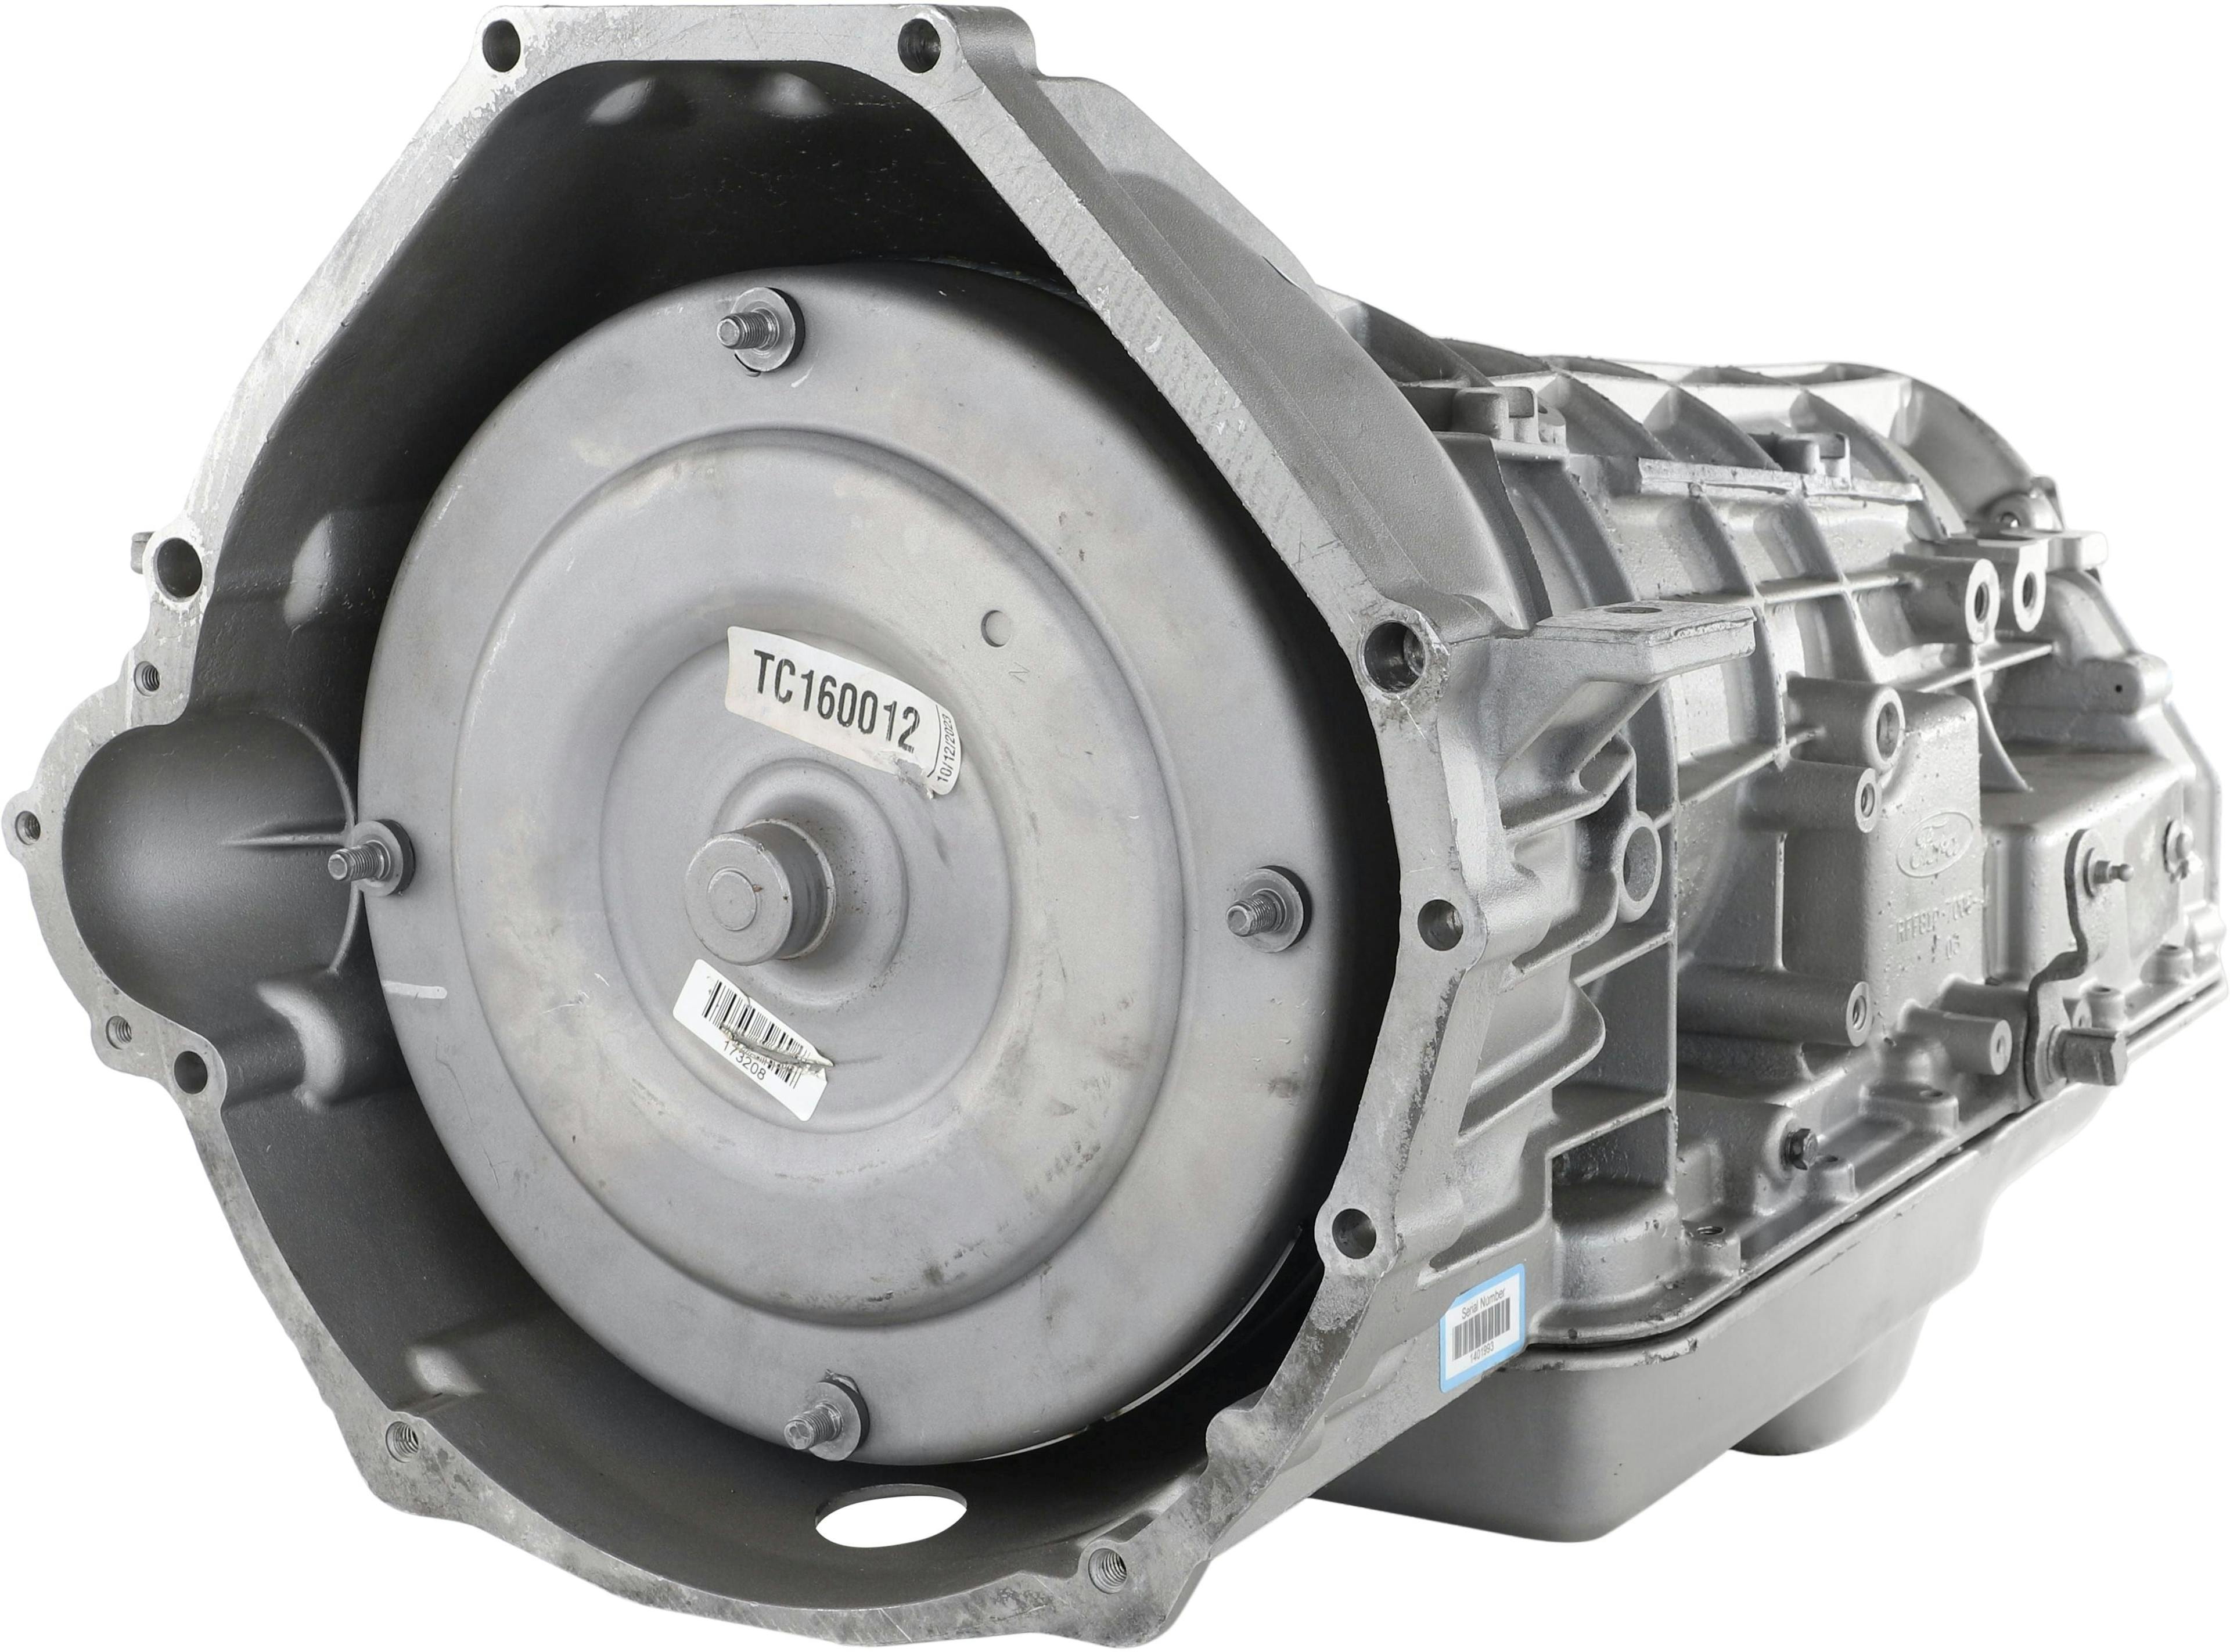 Automatic Transmission for 1998-2005 Ford E-250 Econoline/350, 450 Super Duty/Econoline Super Duty/Excursion/Expedition/F-150, 150 Heritage/F-250, 250, 350 Super Duty and Lincoln Navigator with 5.4L V8 Engine